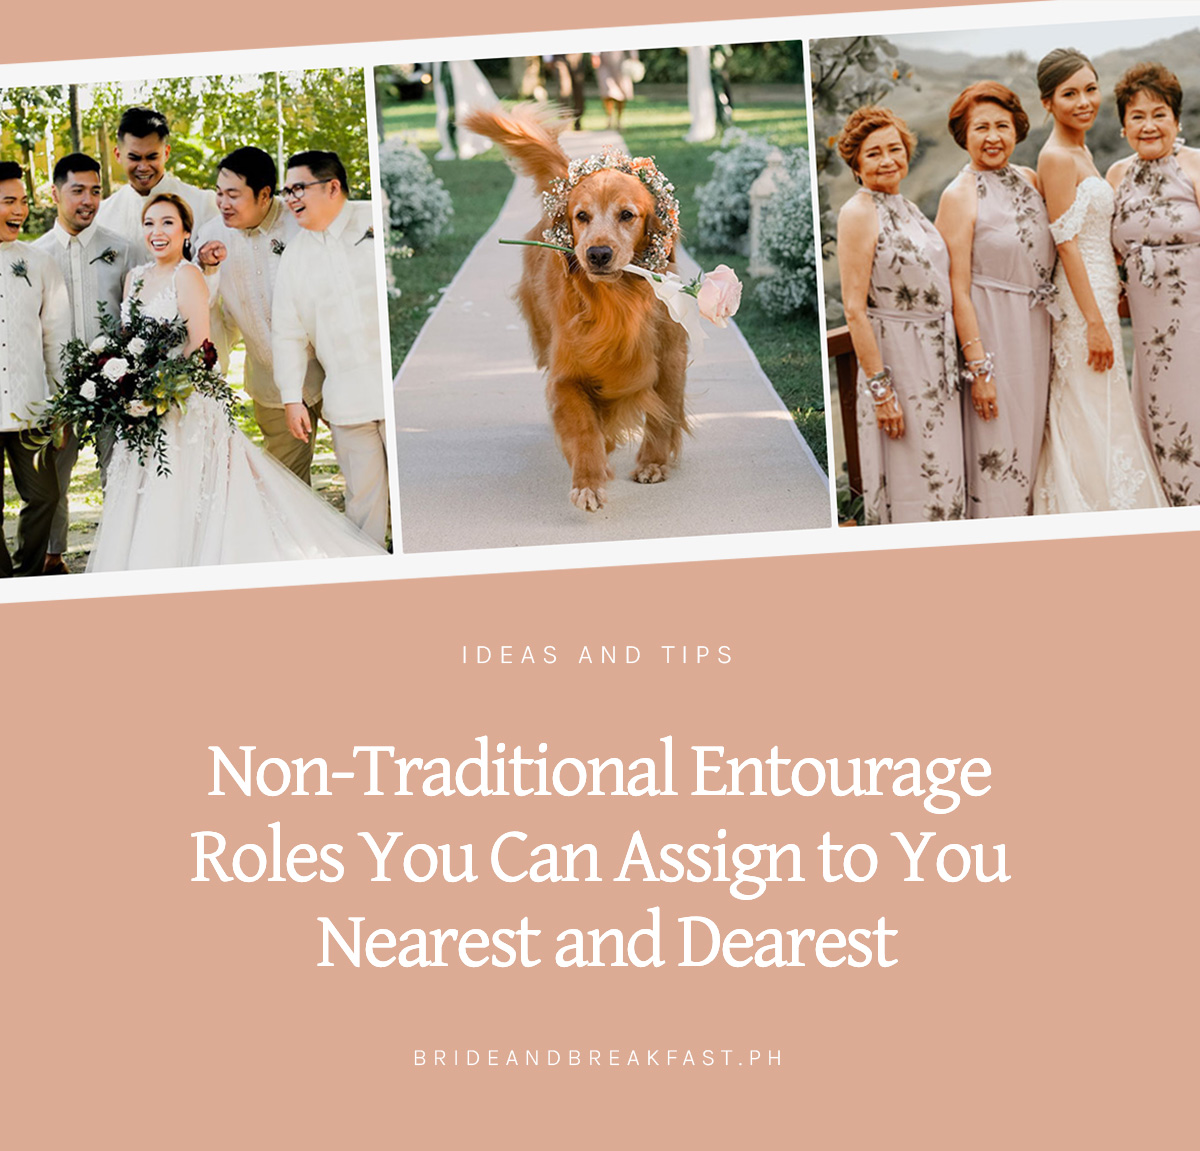 Non-Traditional Entourage Roles You Can Assign to Your Nearest and Dearest